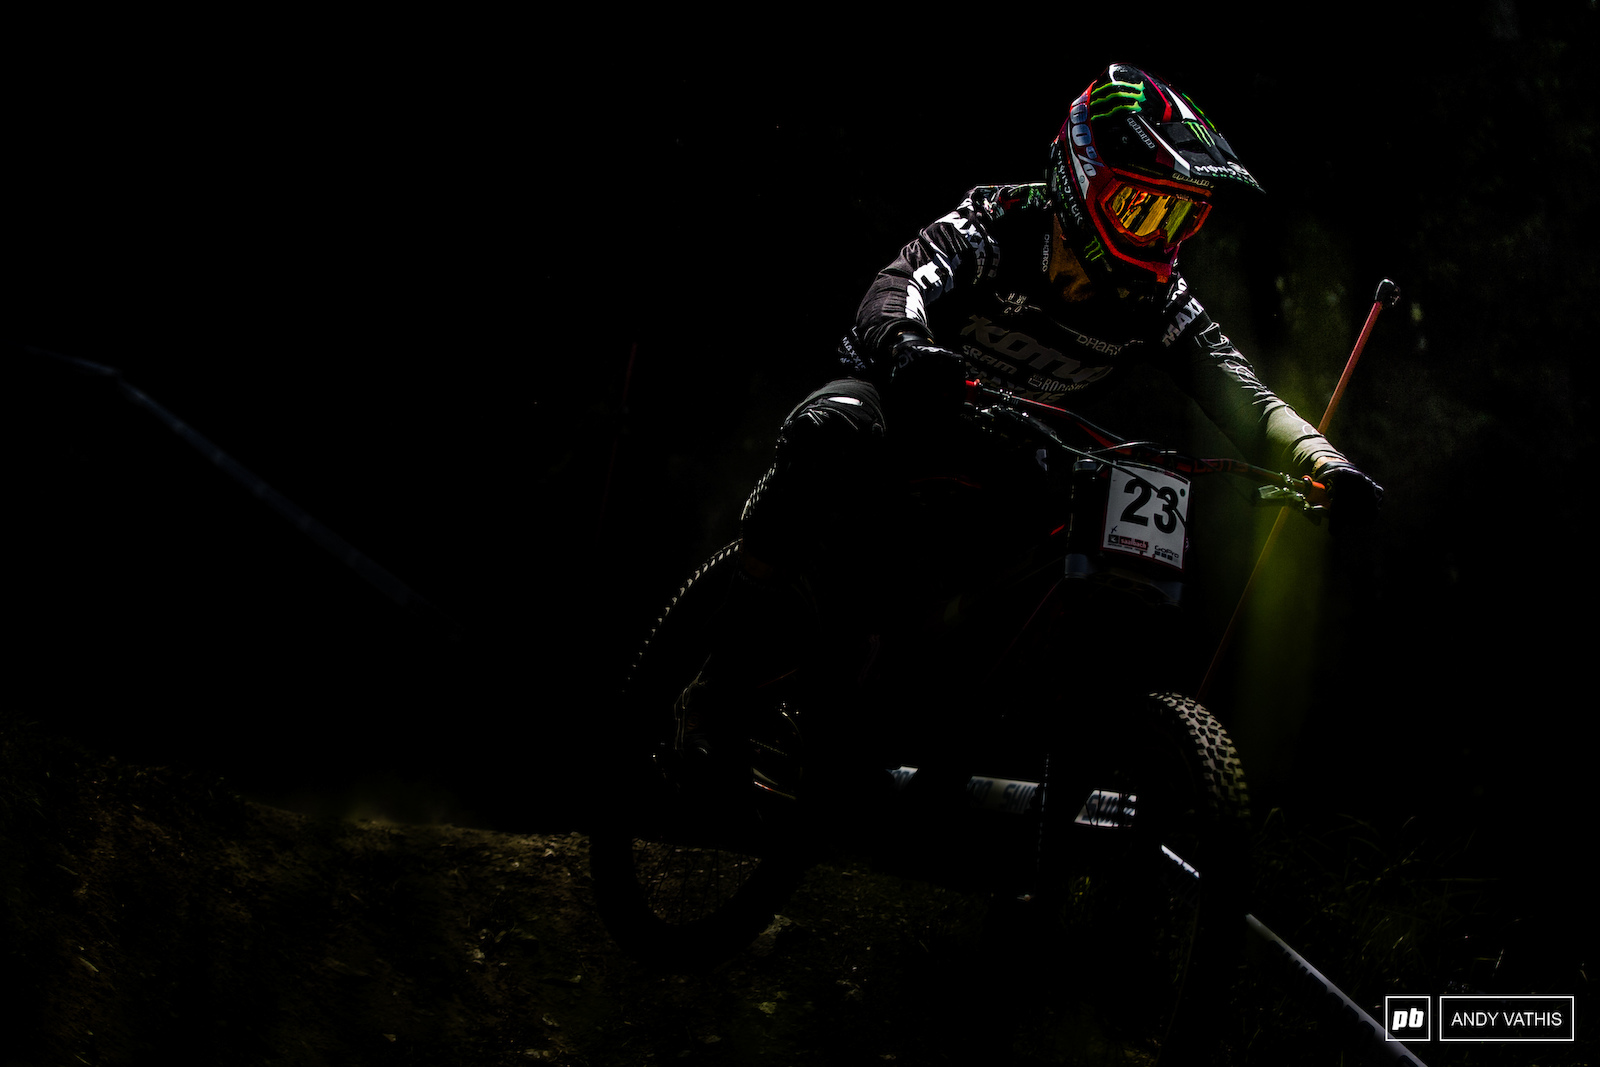 Connor Fearon popping through the harsh midday shadows.